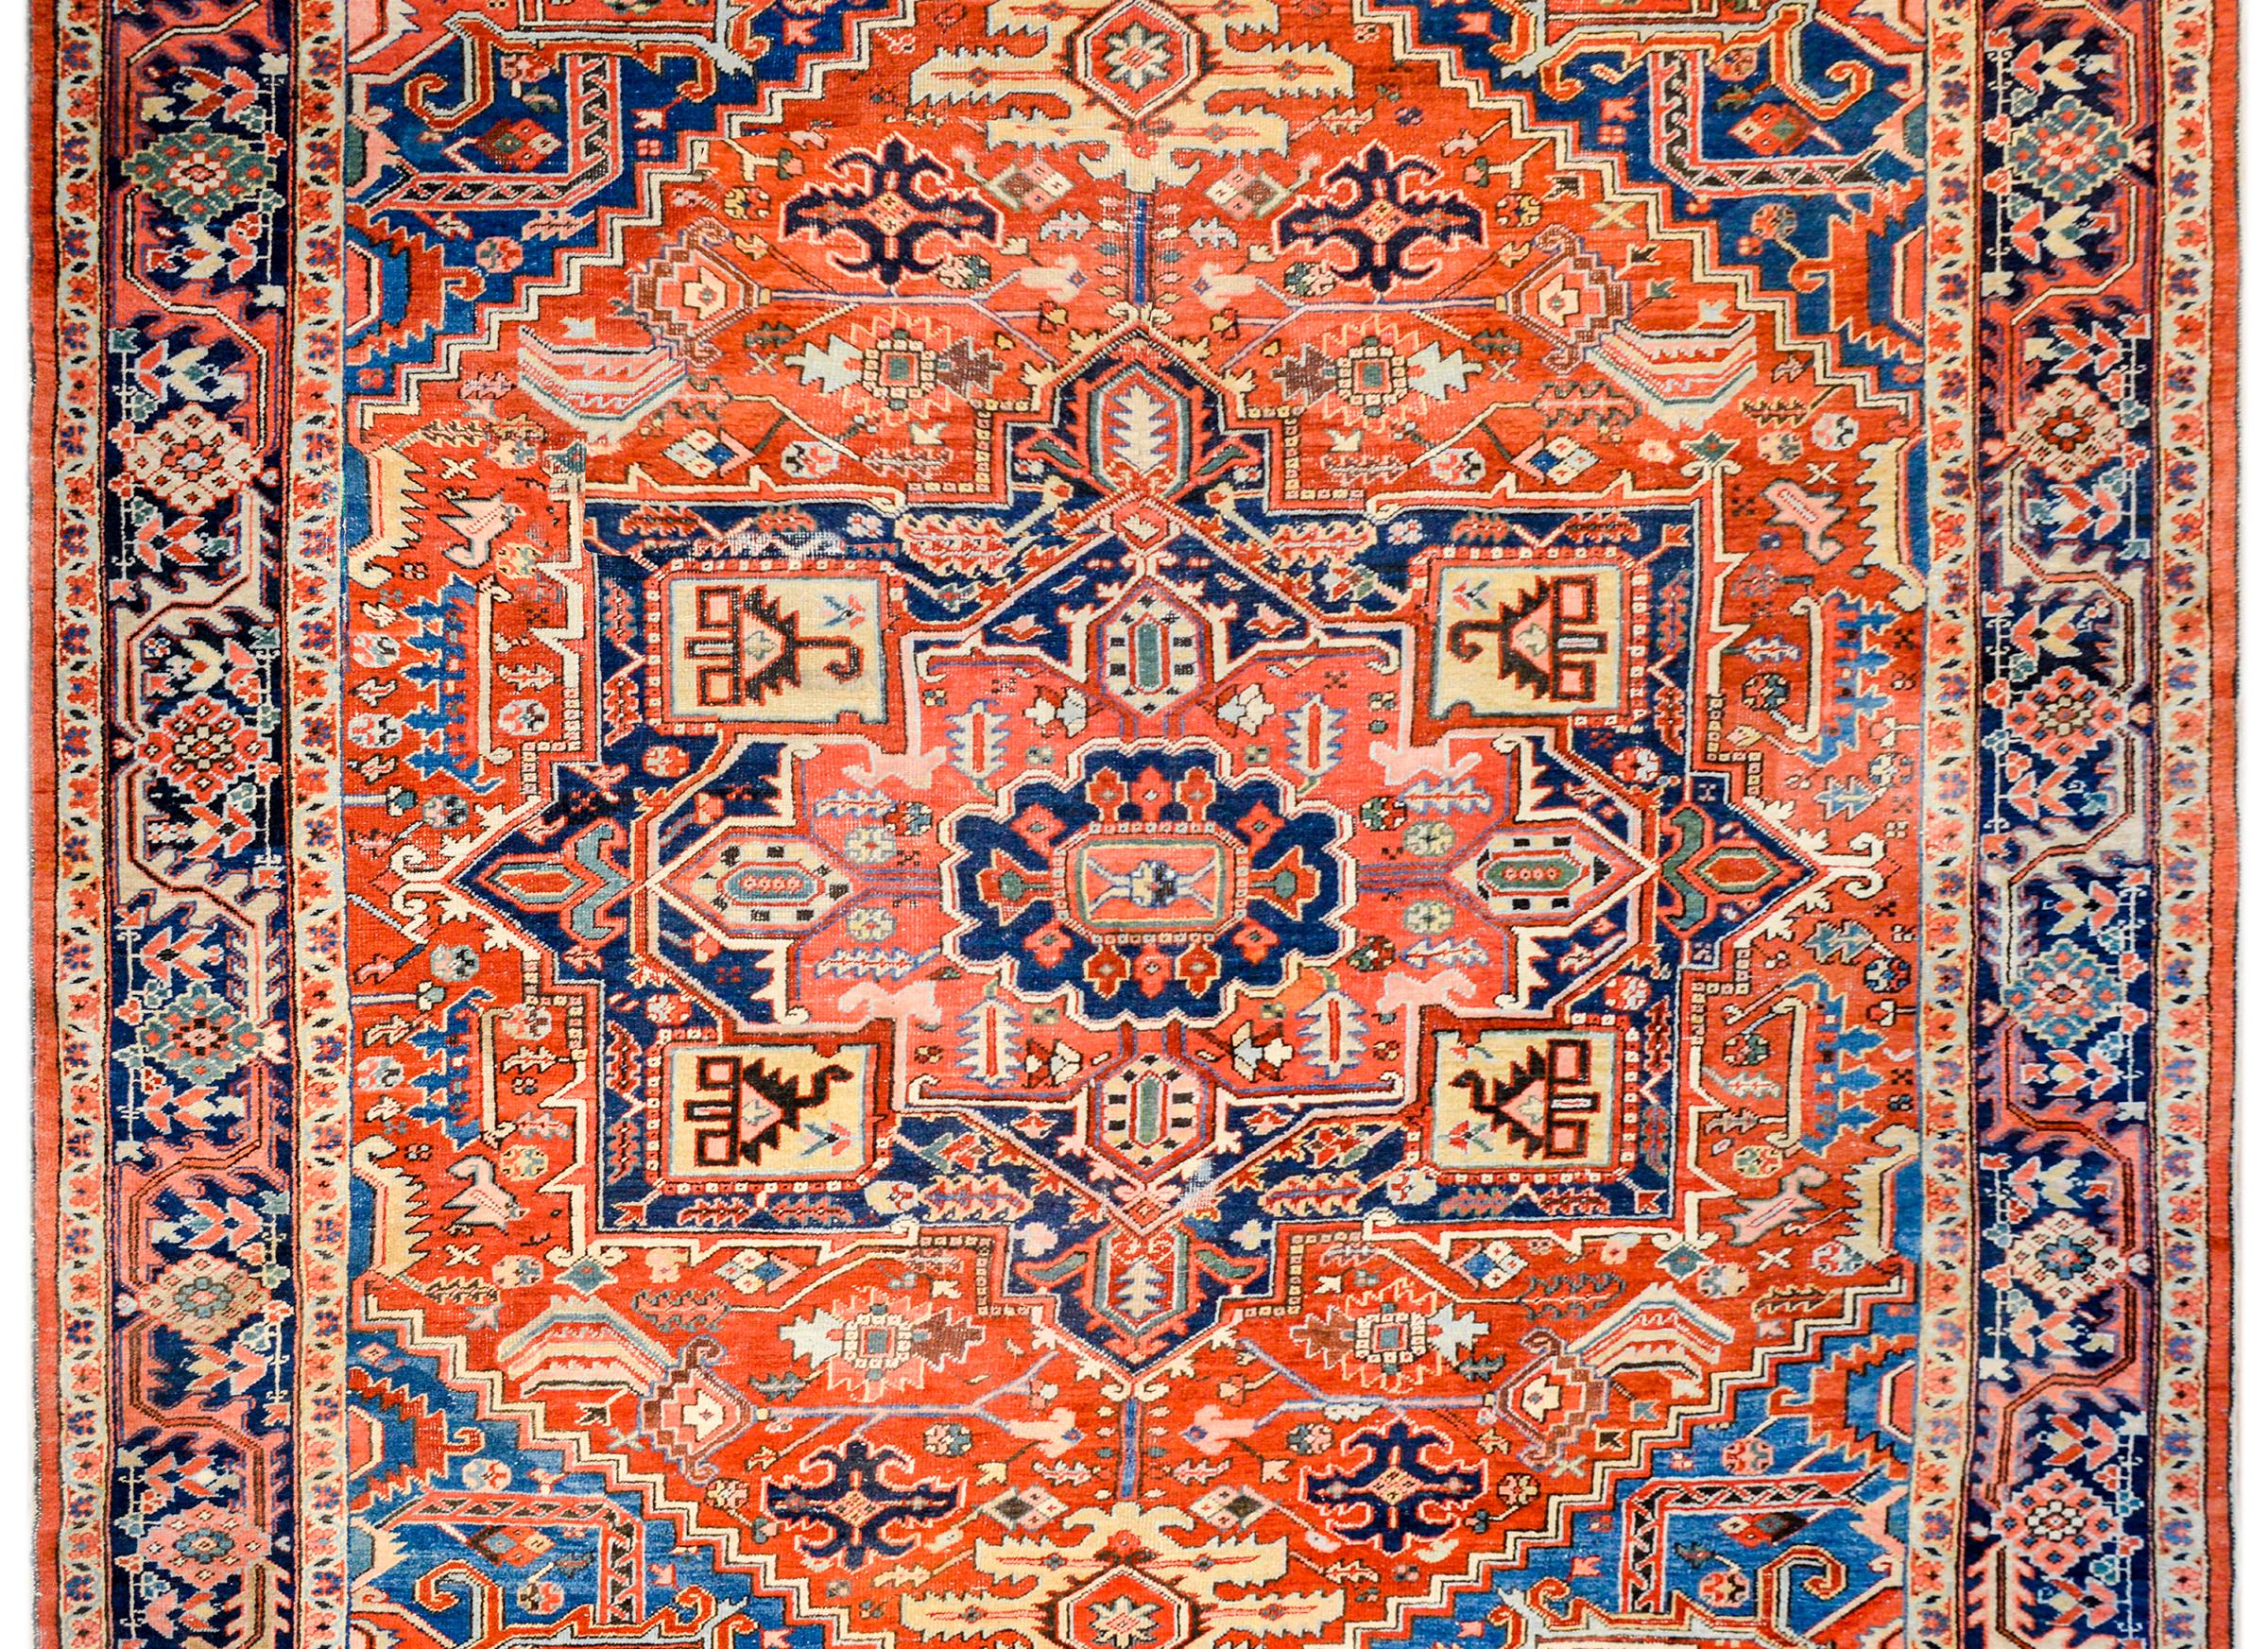 An exciting, beautiful rendered, early 20th century Persian Heriz rug with an elaborately woven multicolored stylized floral and leaf pattern woven in crimson, indigo, gold, green, and salmon colored wool. The border is wonderful with a wide central